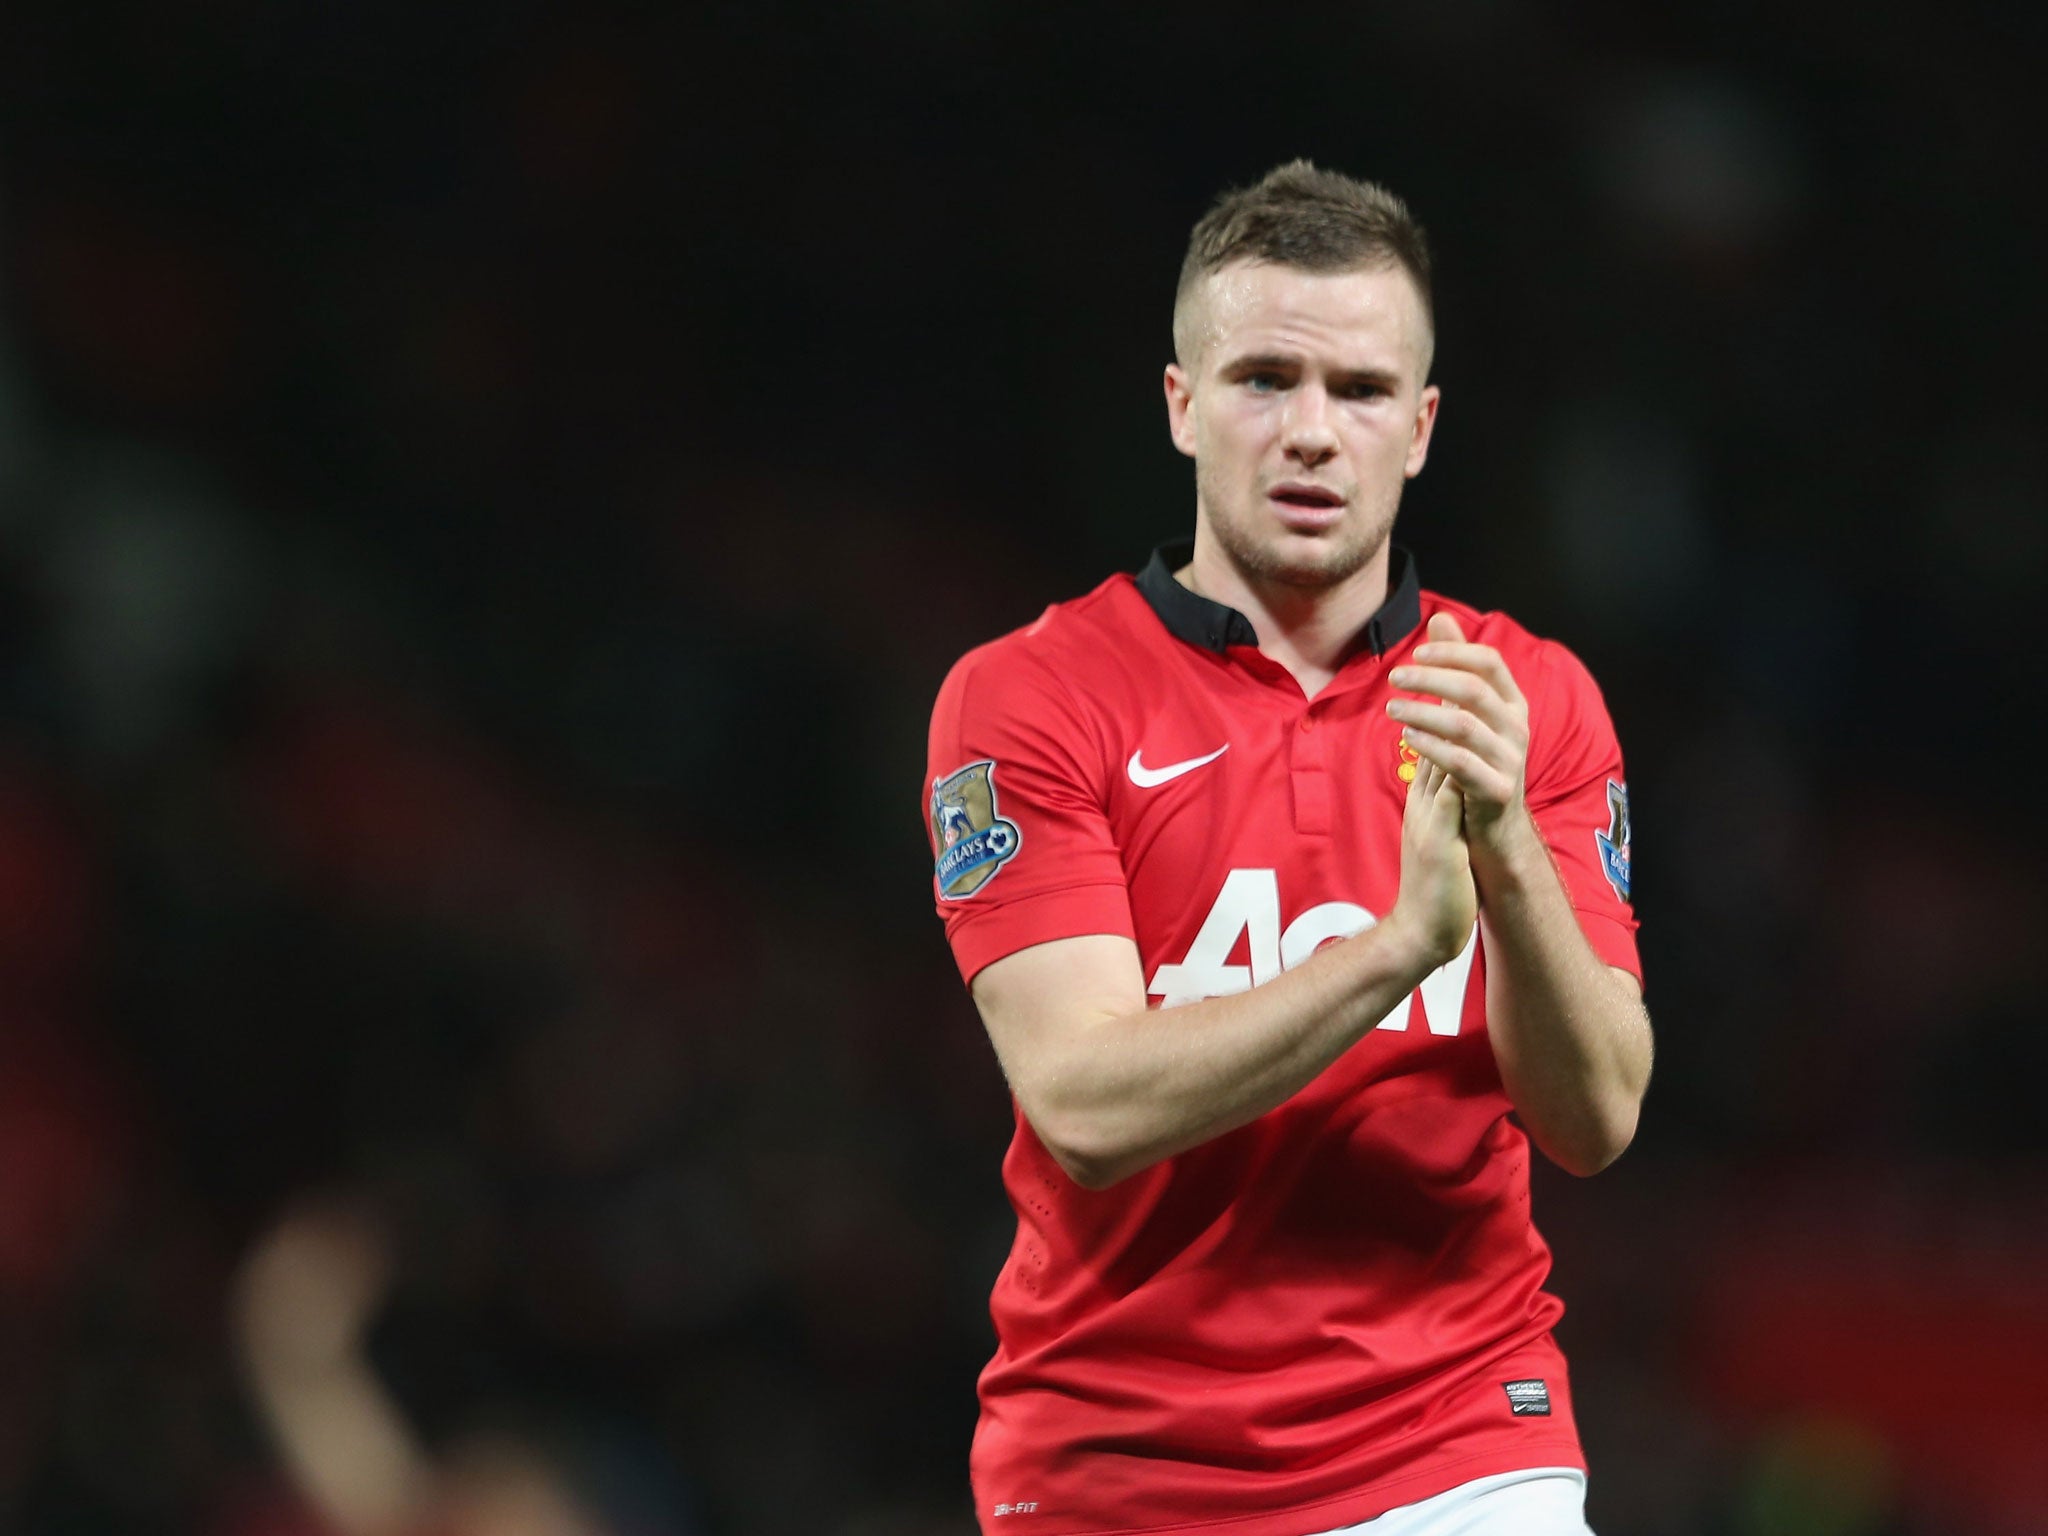 Over 4000 people have already signed a petition to ban Cleverley from the World Cup squad